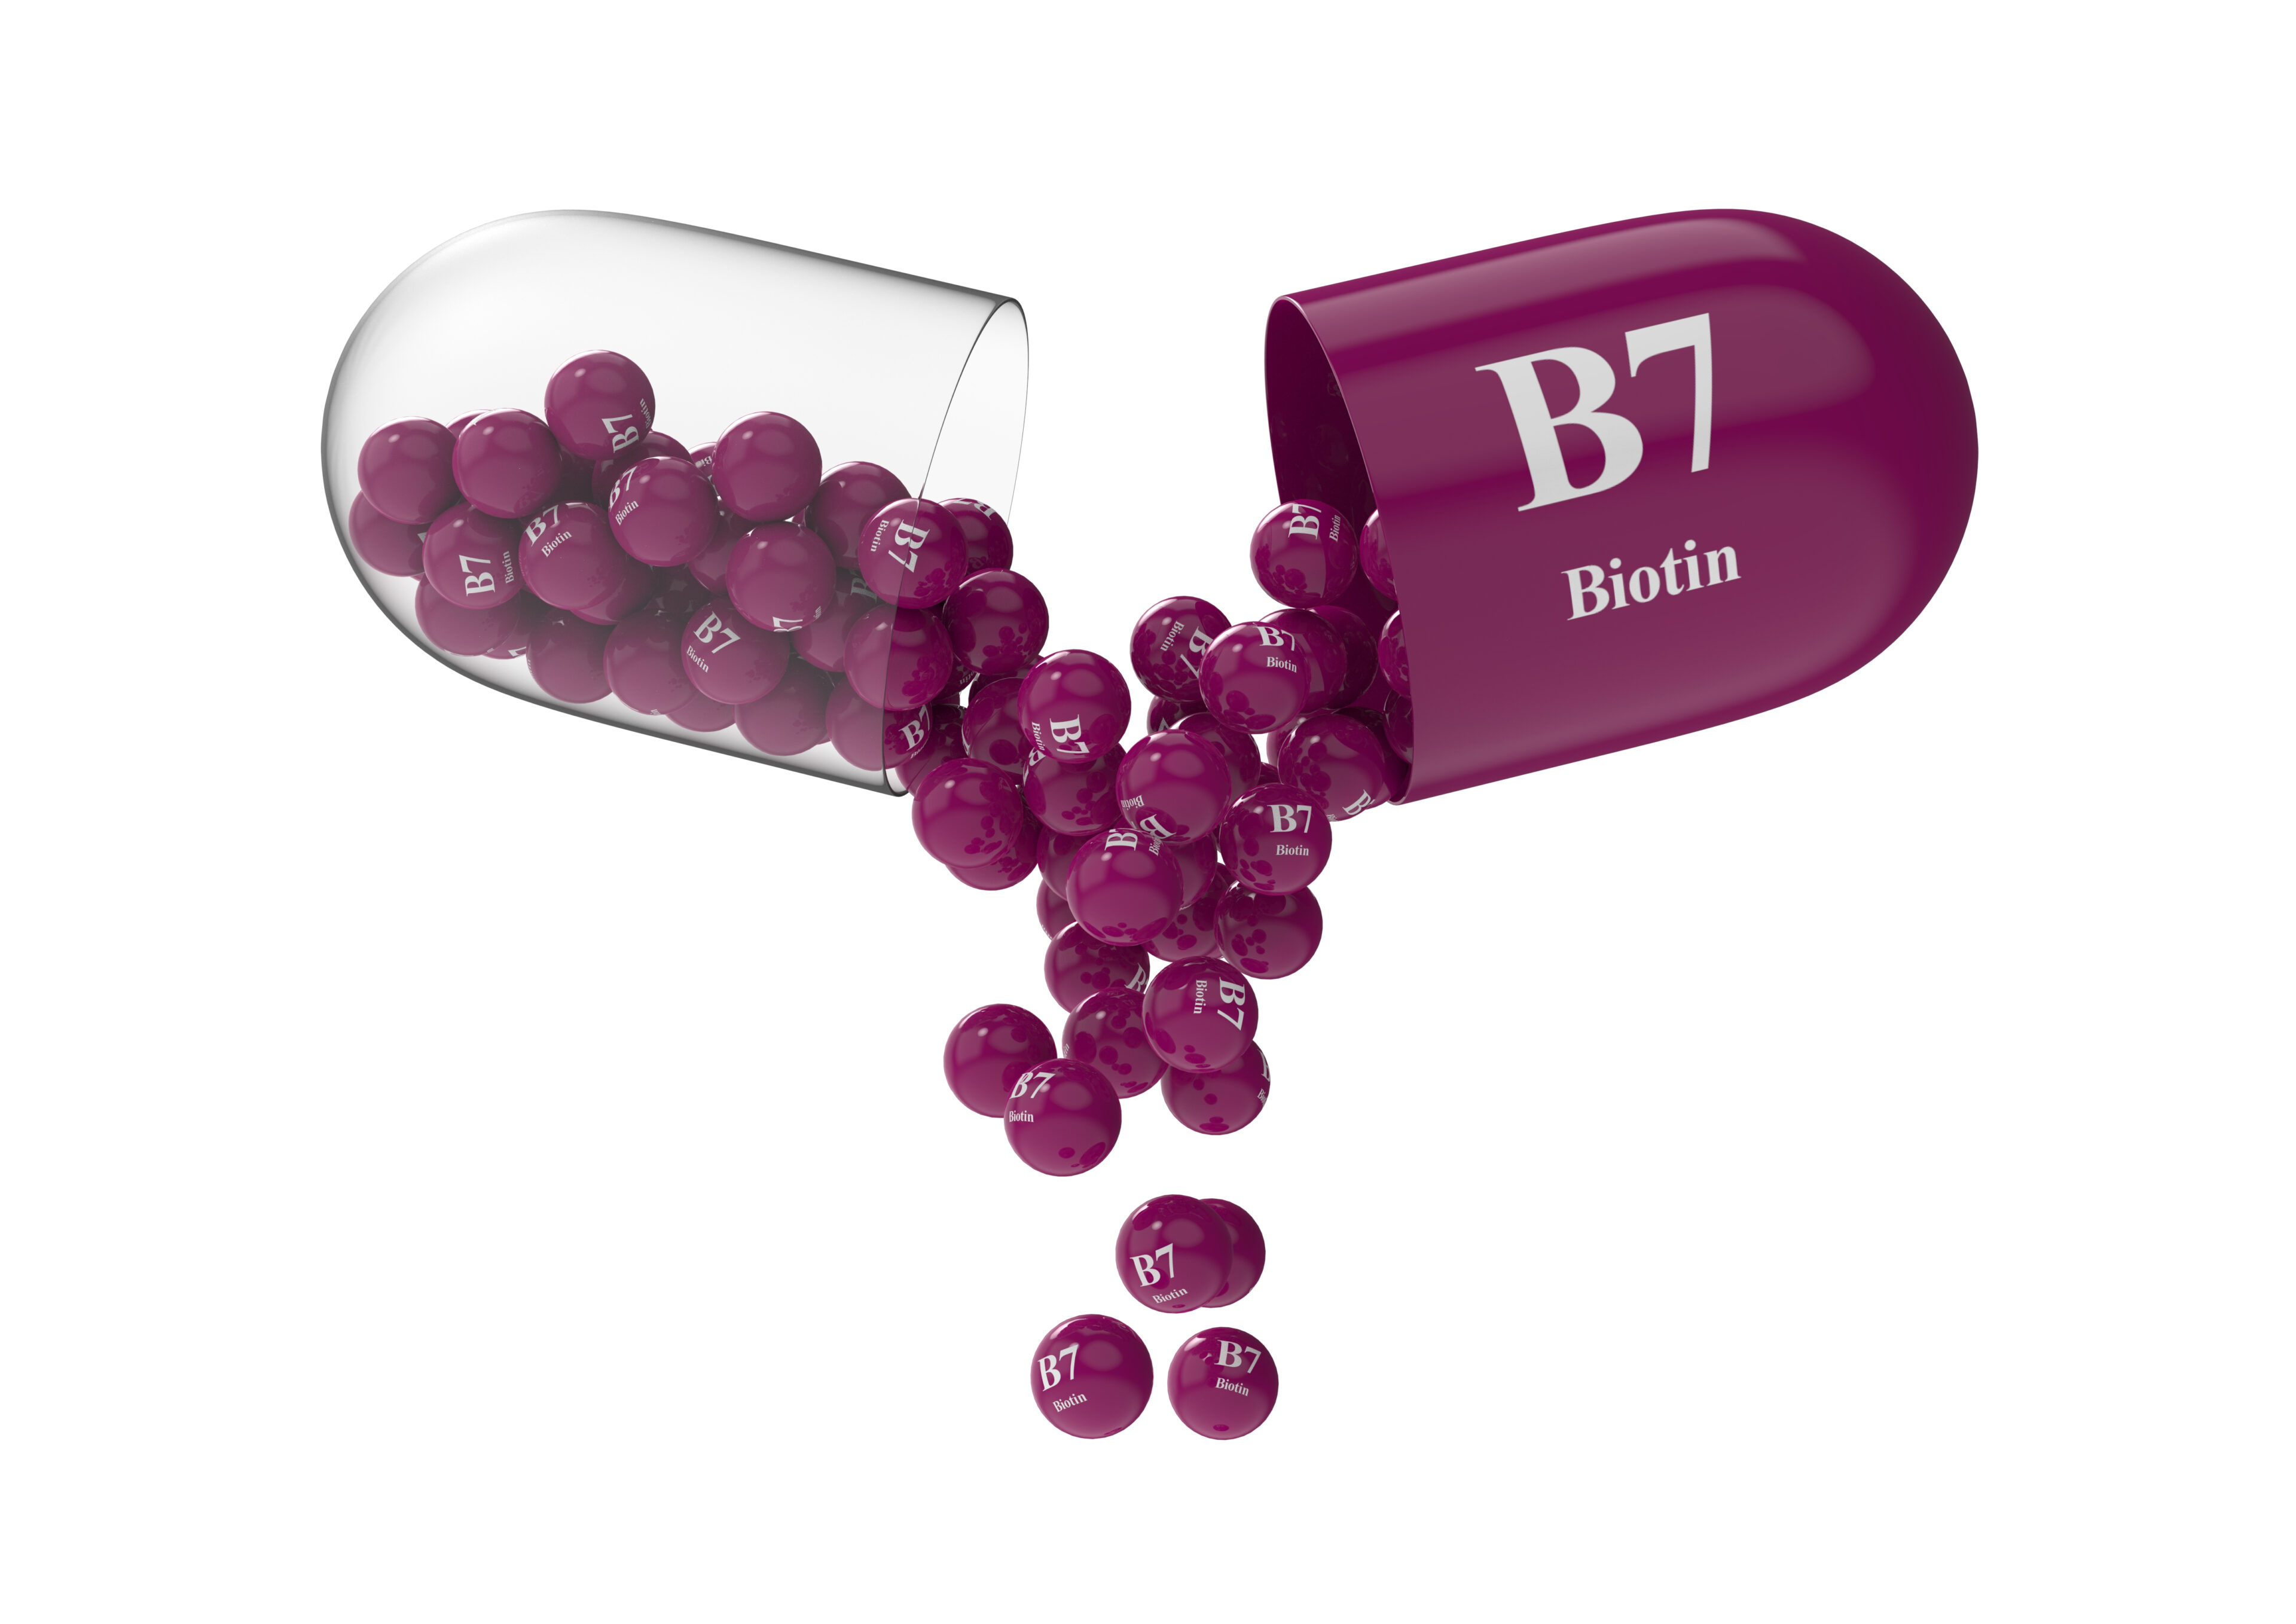 Open capsule with b7 biotin from which the vitamin composition is poured